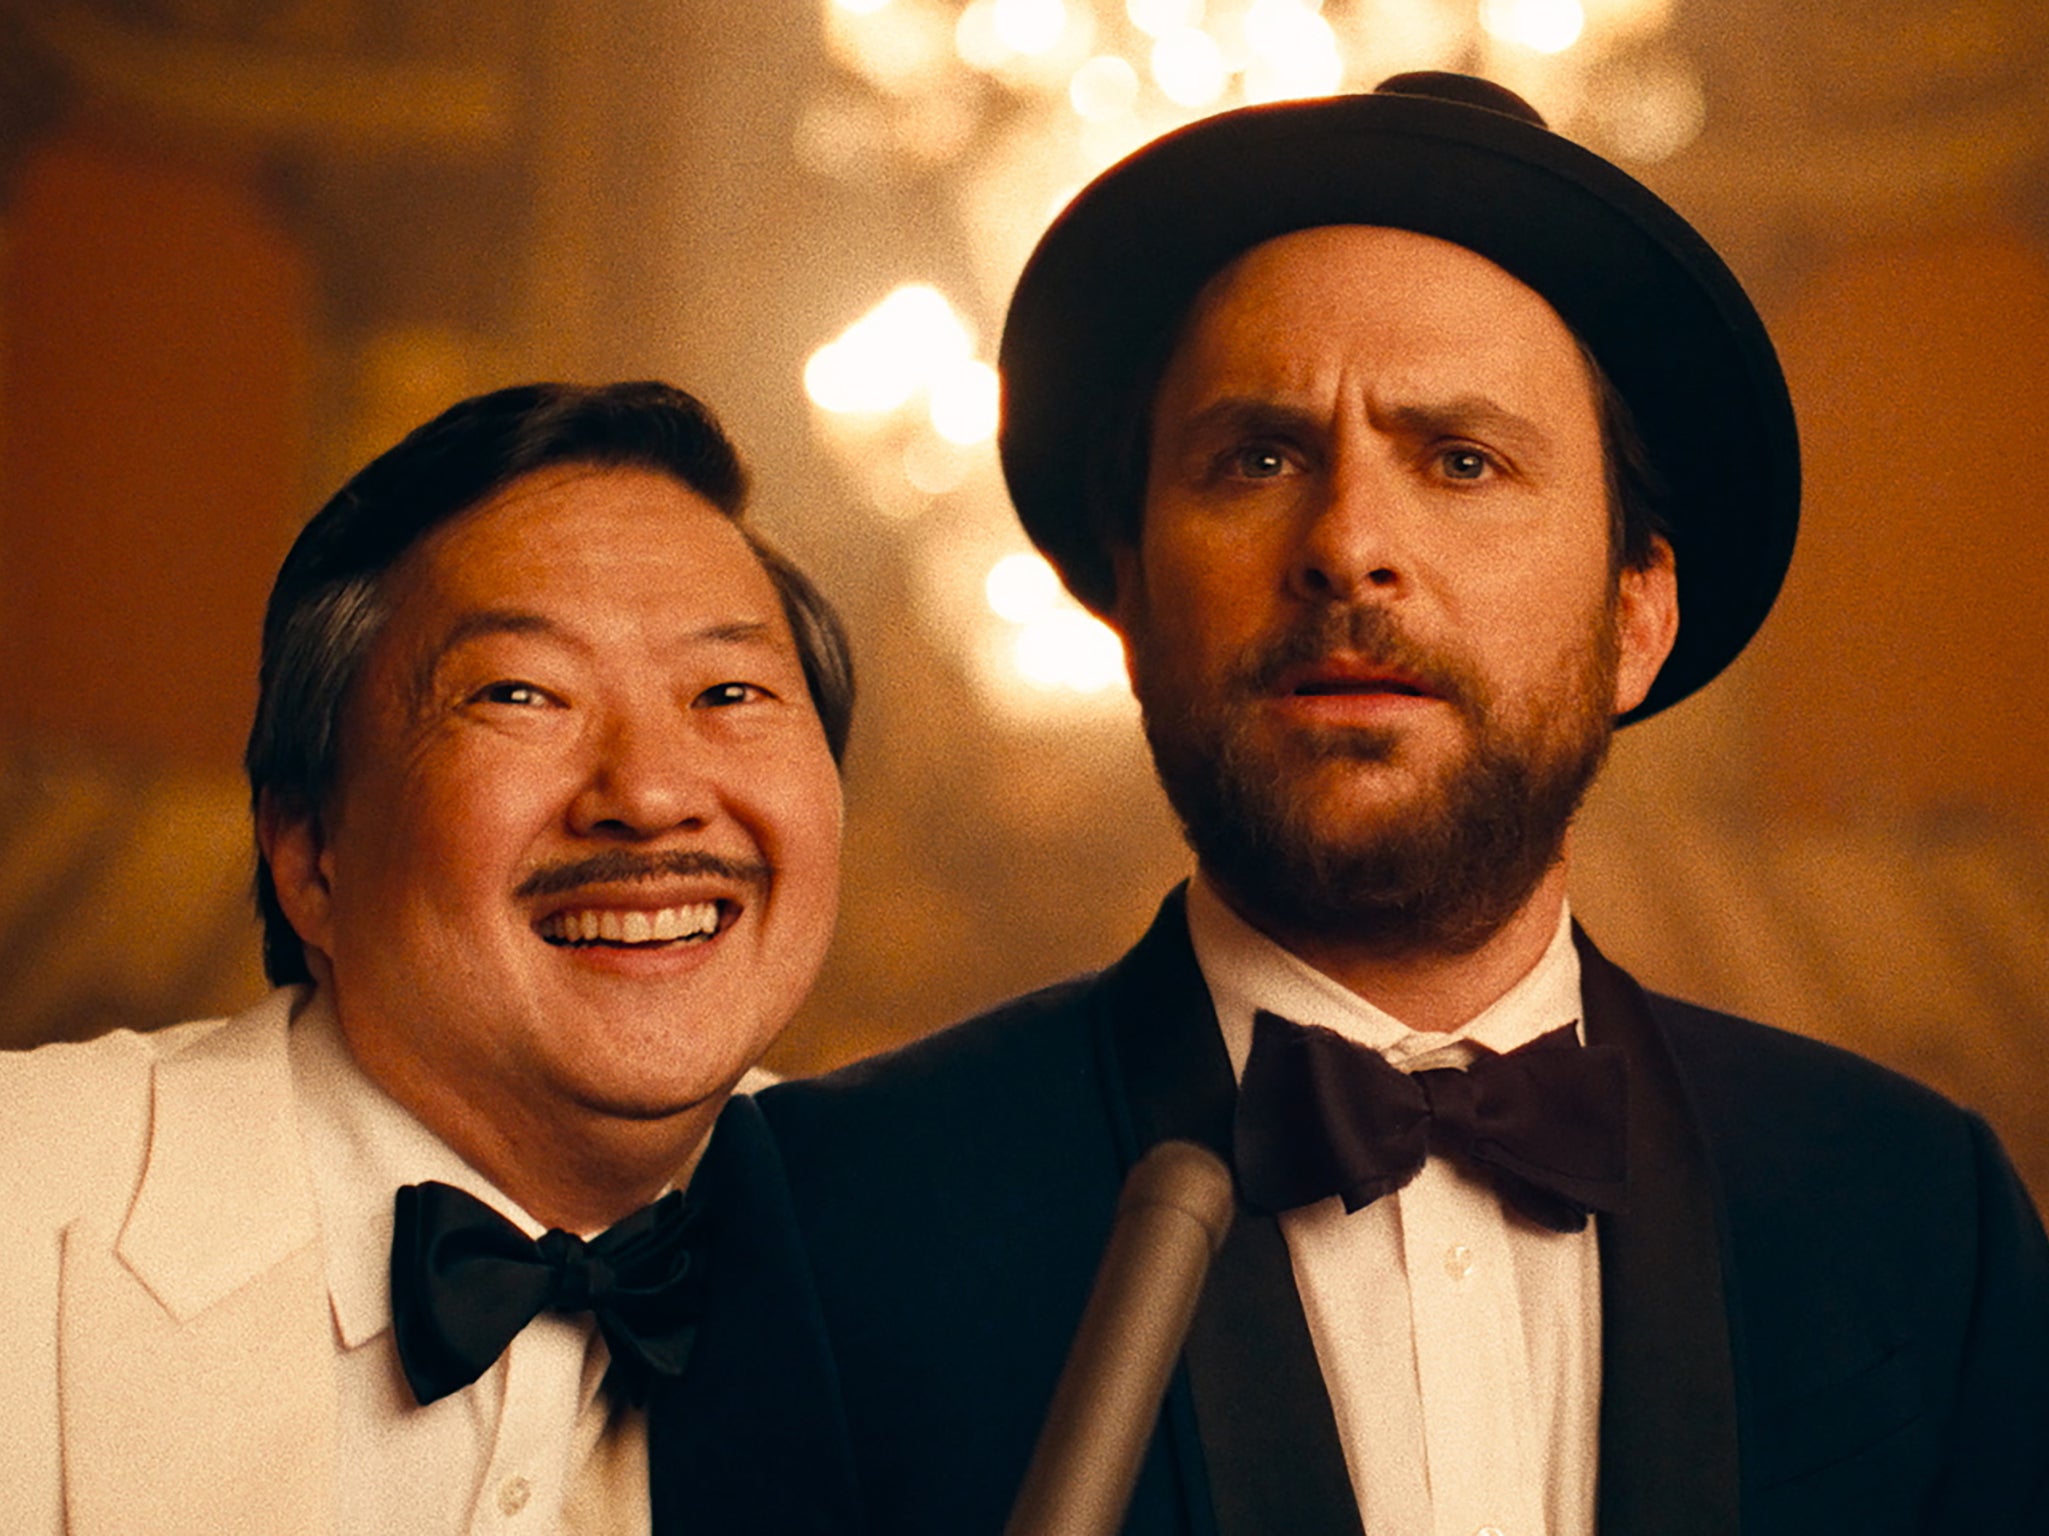 Failing upwards: Ken Jeong and Charlie Day in ‘Fool’s Paradise’